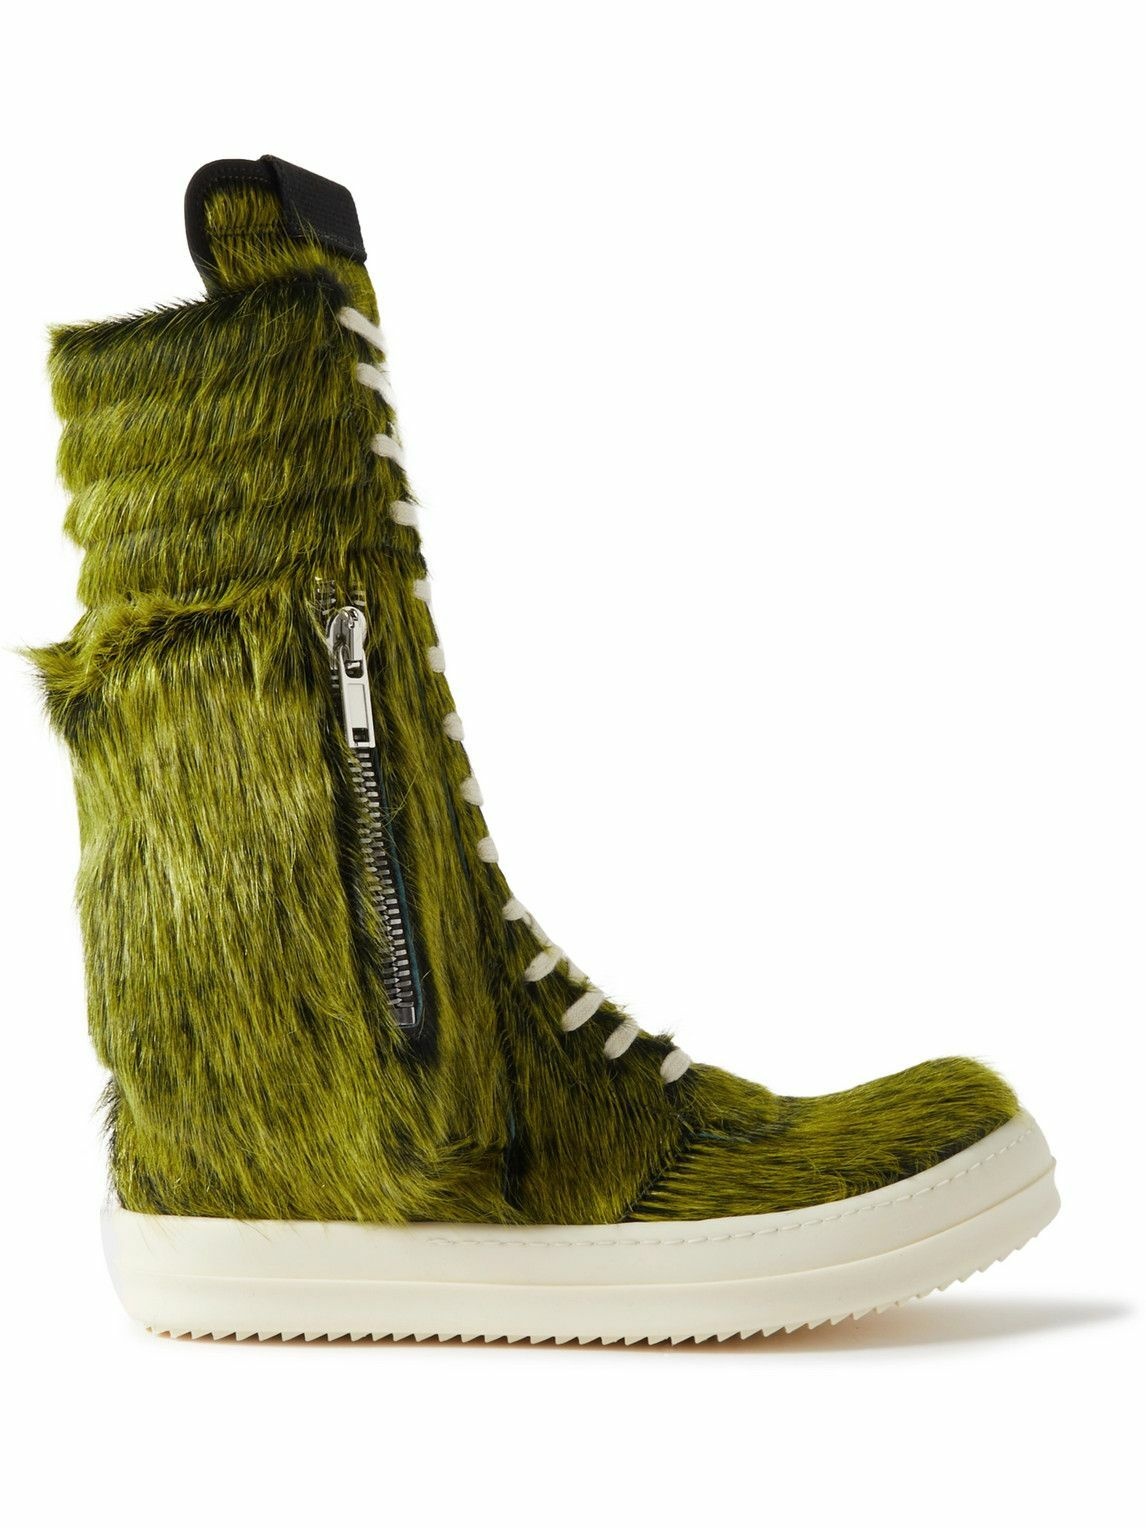 Rick Owens - Geobasket Calf Hair and Leather High-Top Sneakers - Green ...